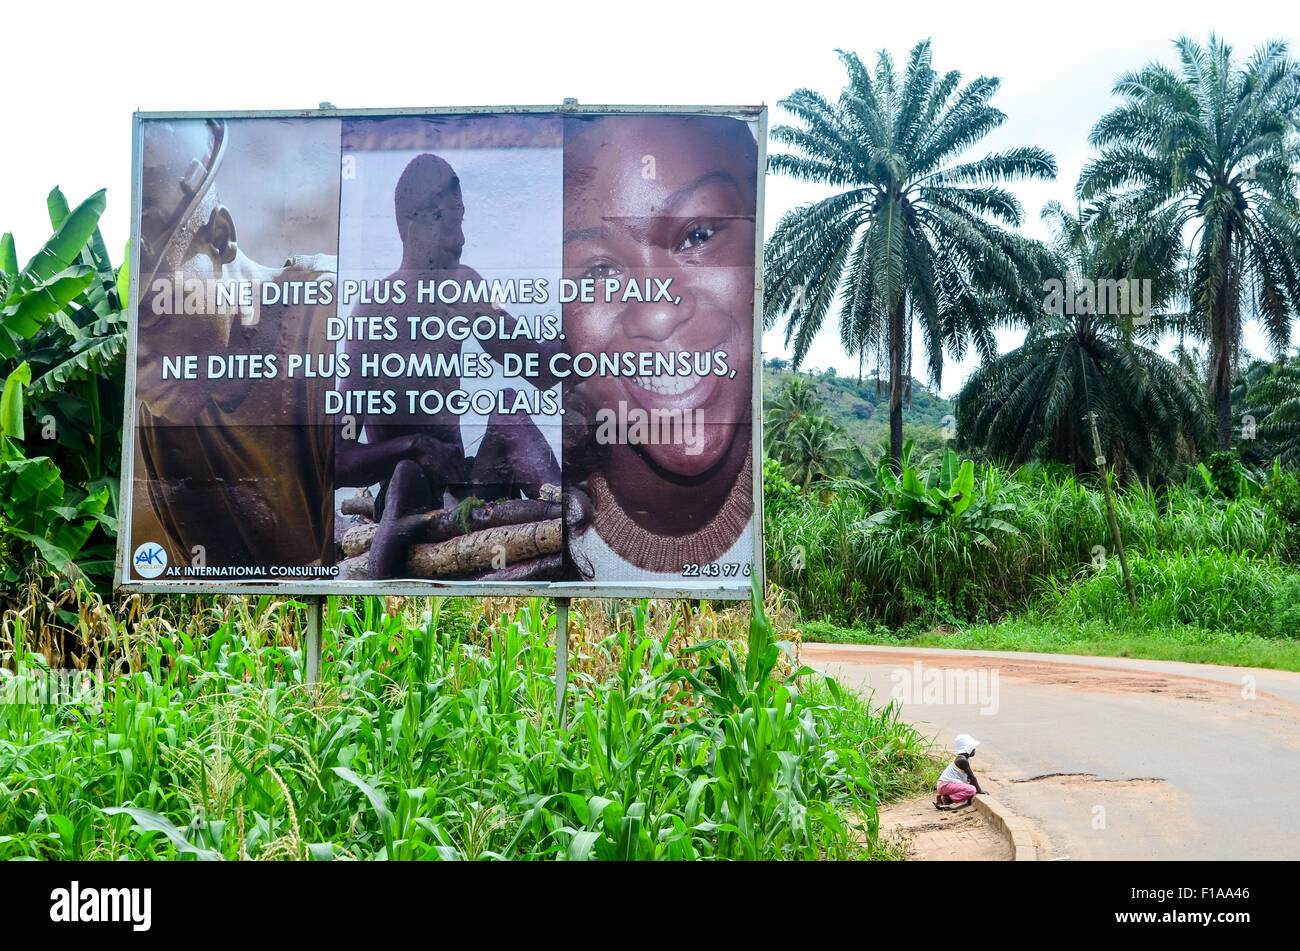 Campaign for Togolese Stock Photo